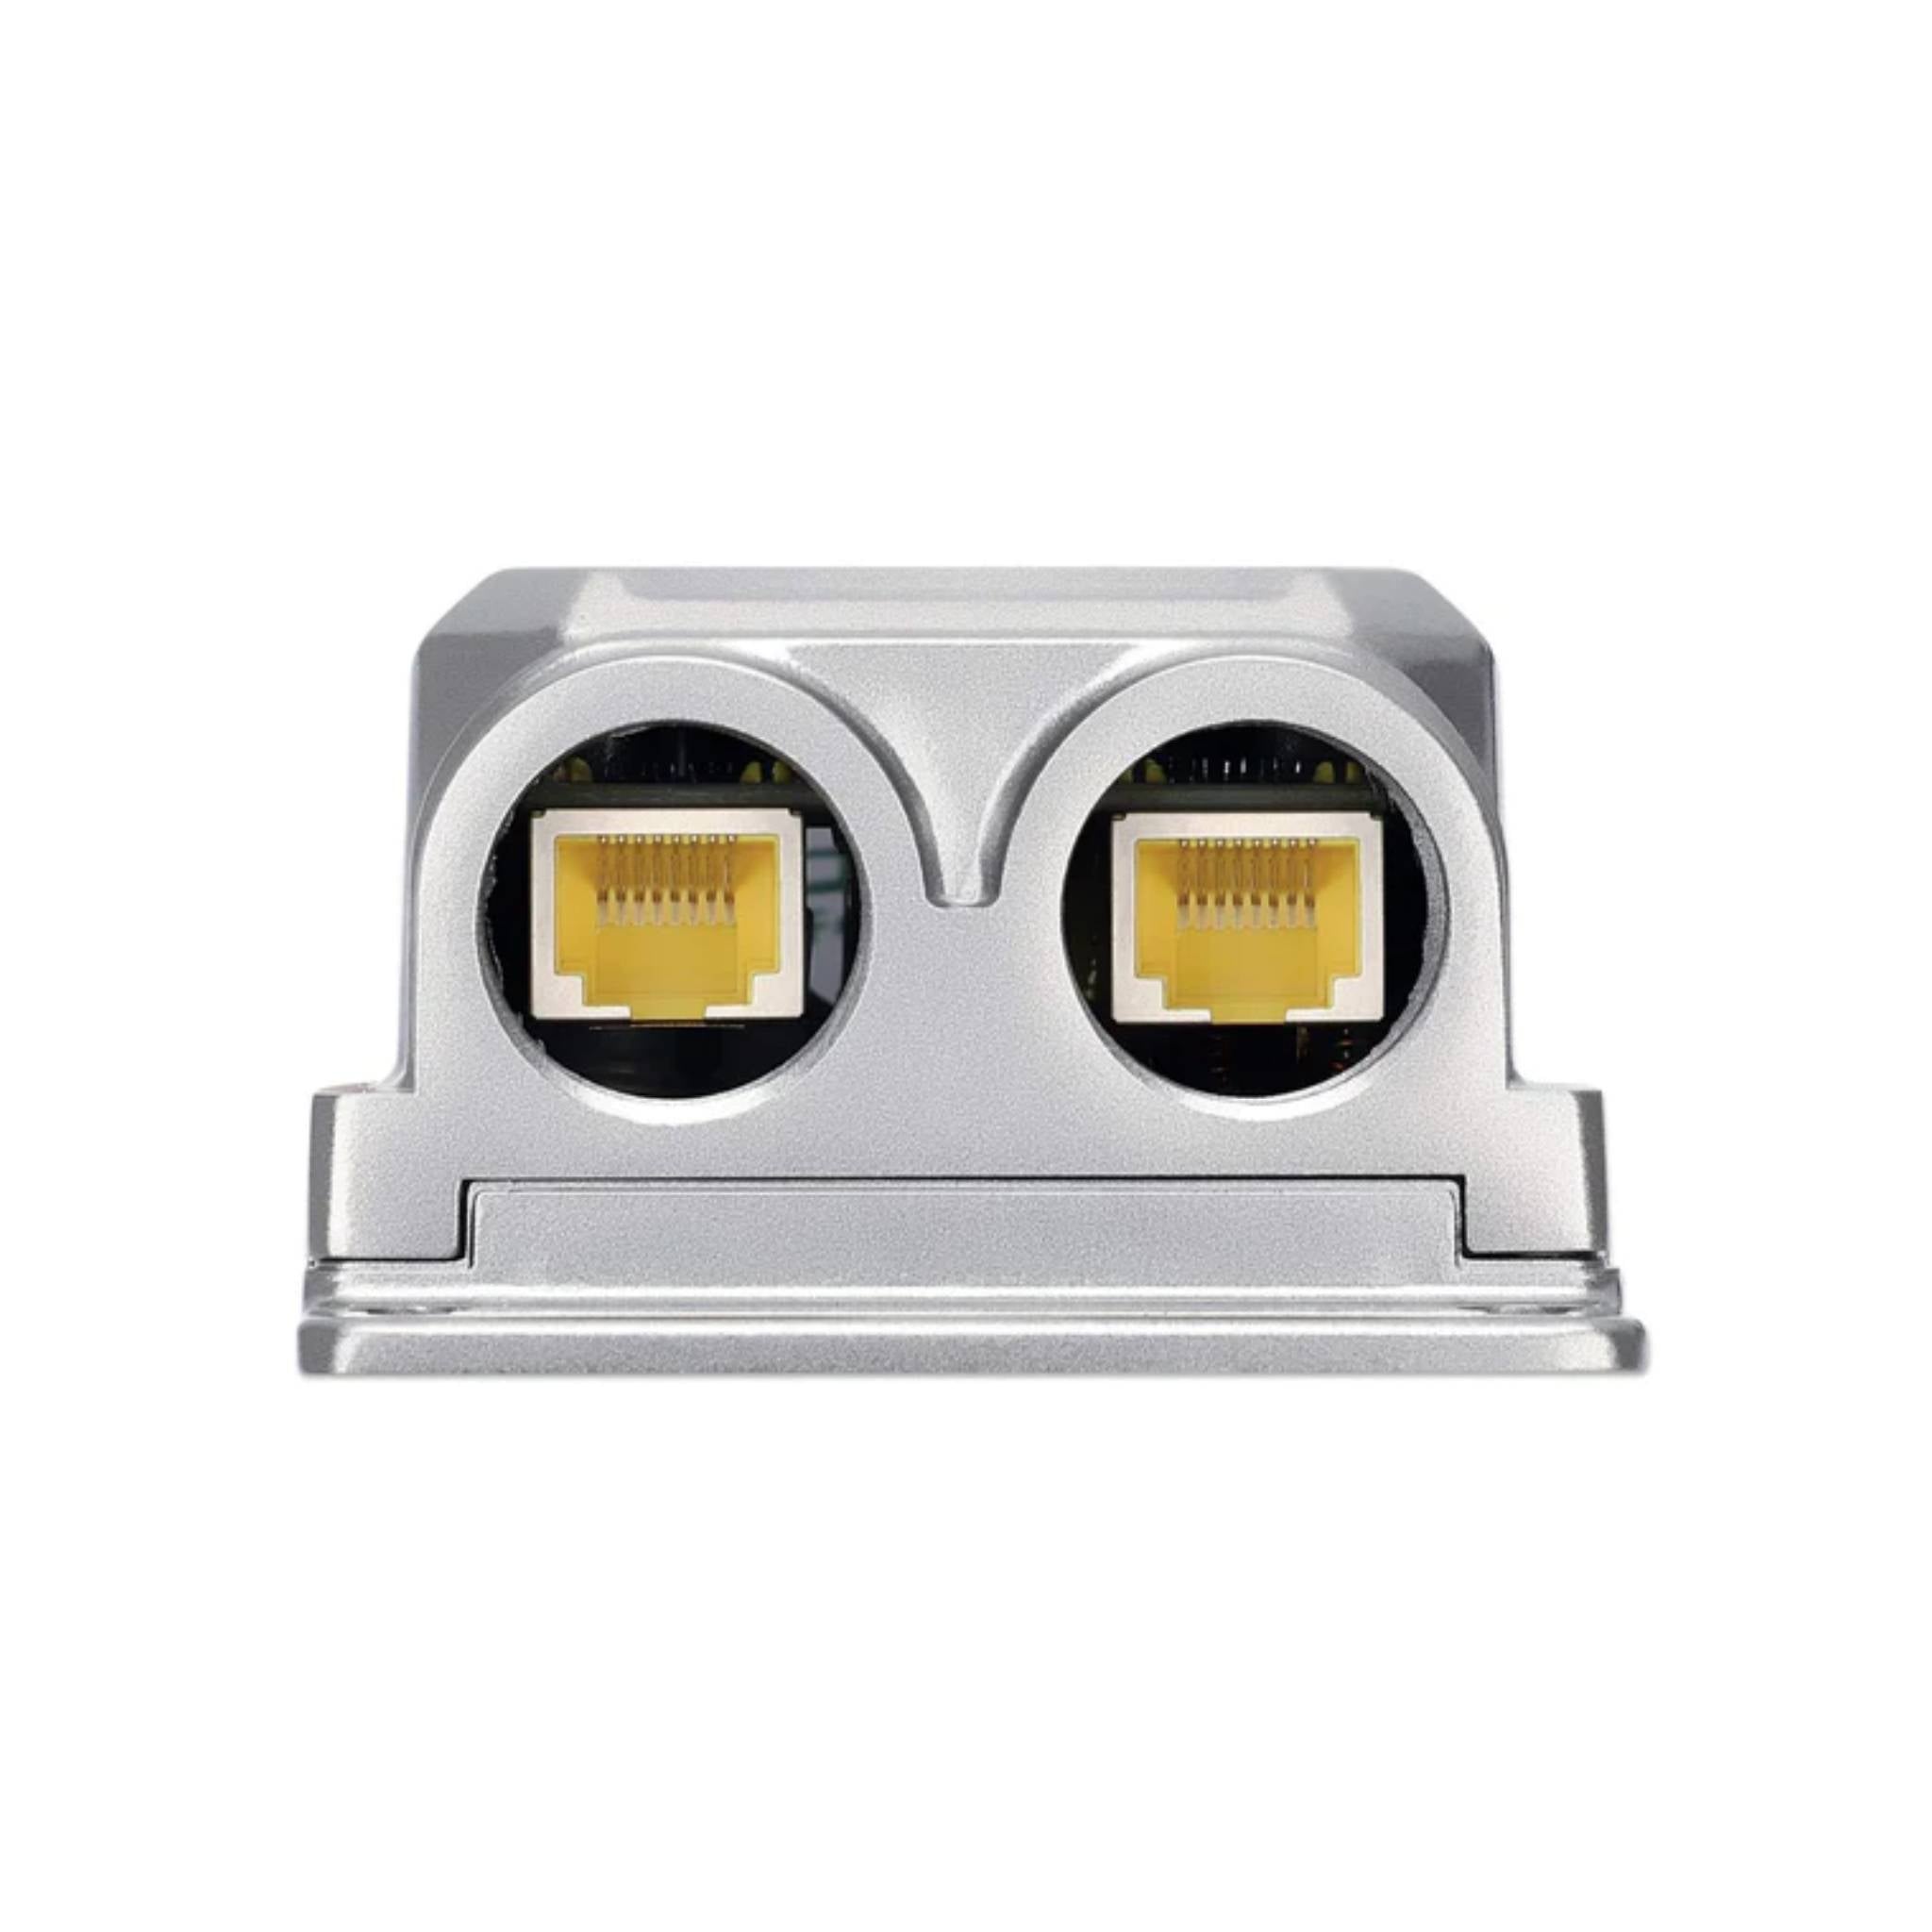 "High-Power Outdoor POE Injector: 60W, One-Port Metal Housing for Enhanced Connectivity and Durability"